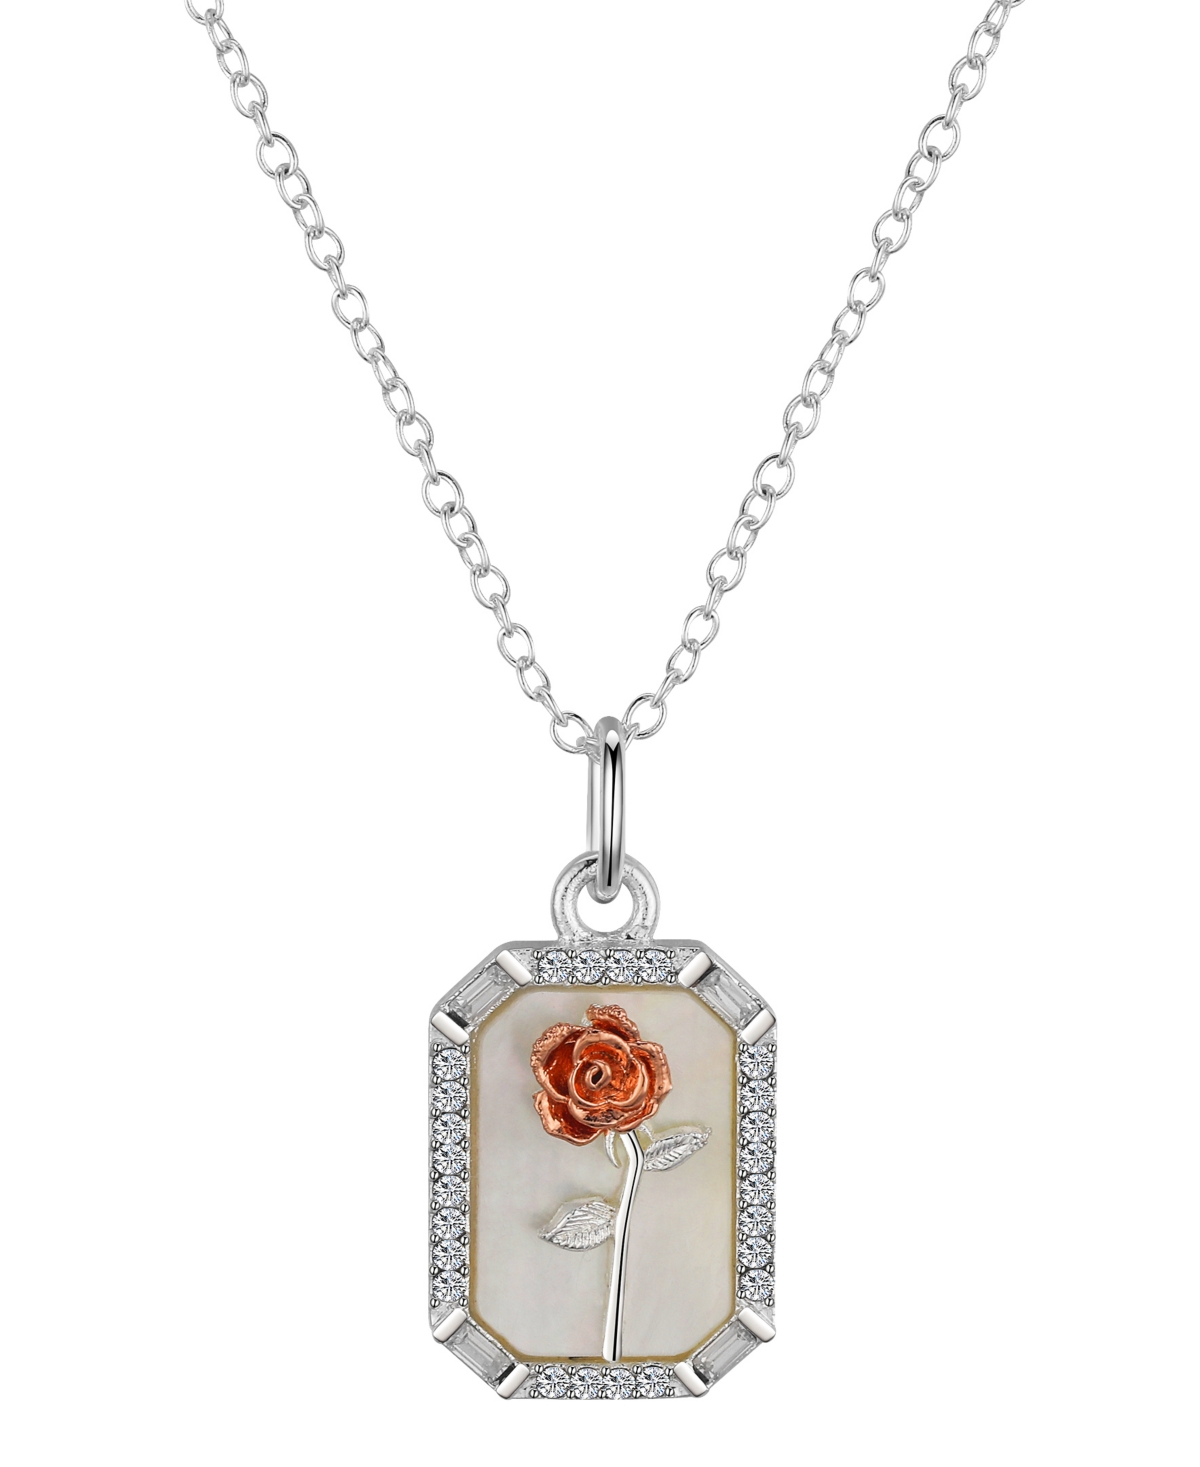 Disney Mother Of Pearl and Crystal Rose Gold Plated Belle Rose Necklace